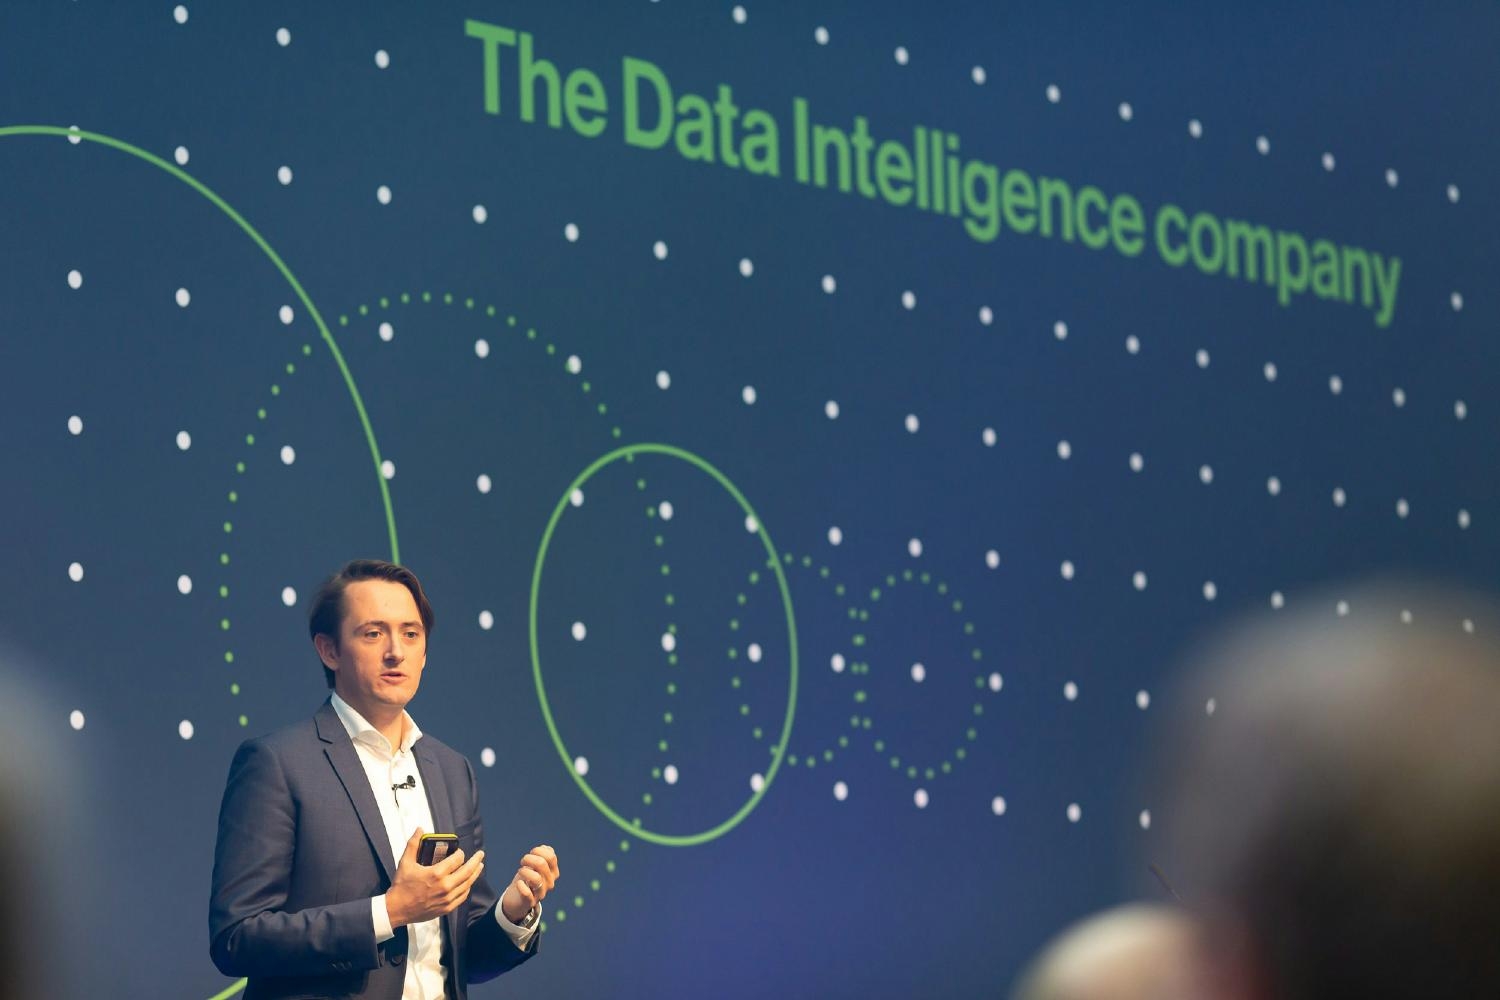 Felix Van de Maele, Co-Founder and CEO, on stage at Collibra's Data Citizens conference.